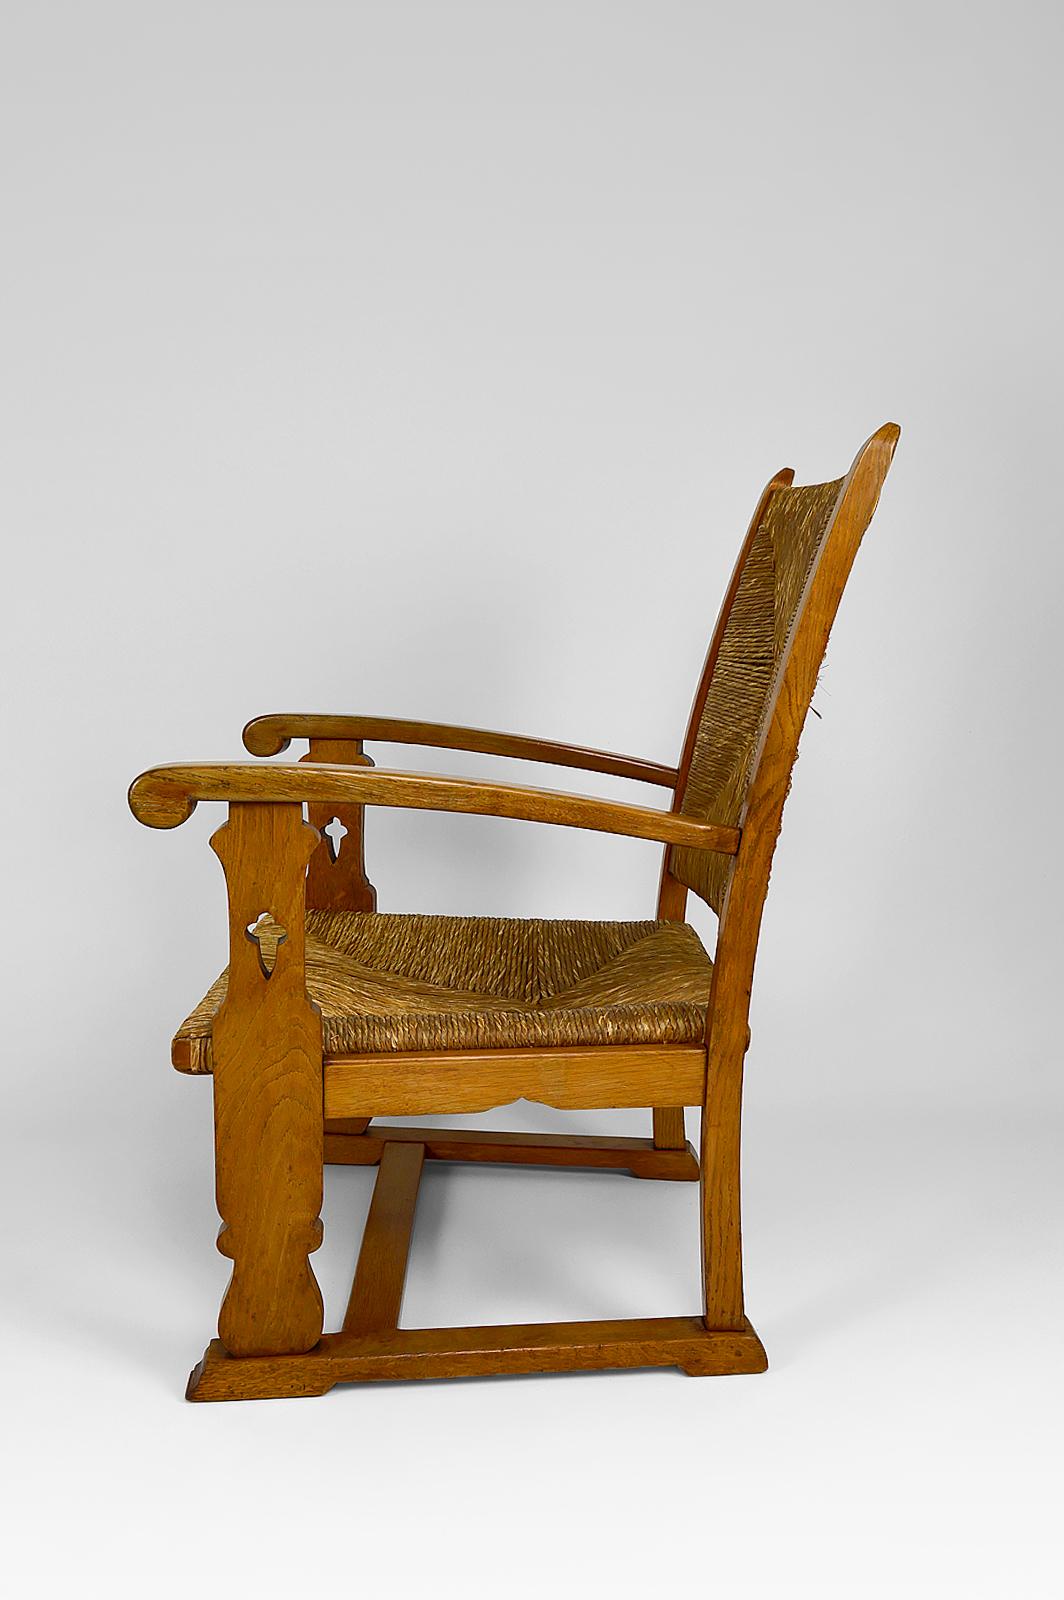 Art & Crafts / Gothic Revival Armchair in Oak and Straw, circa 1900 3